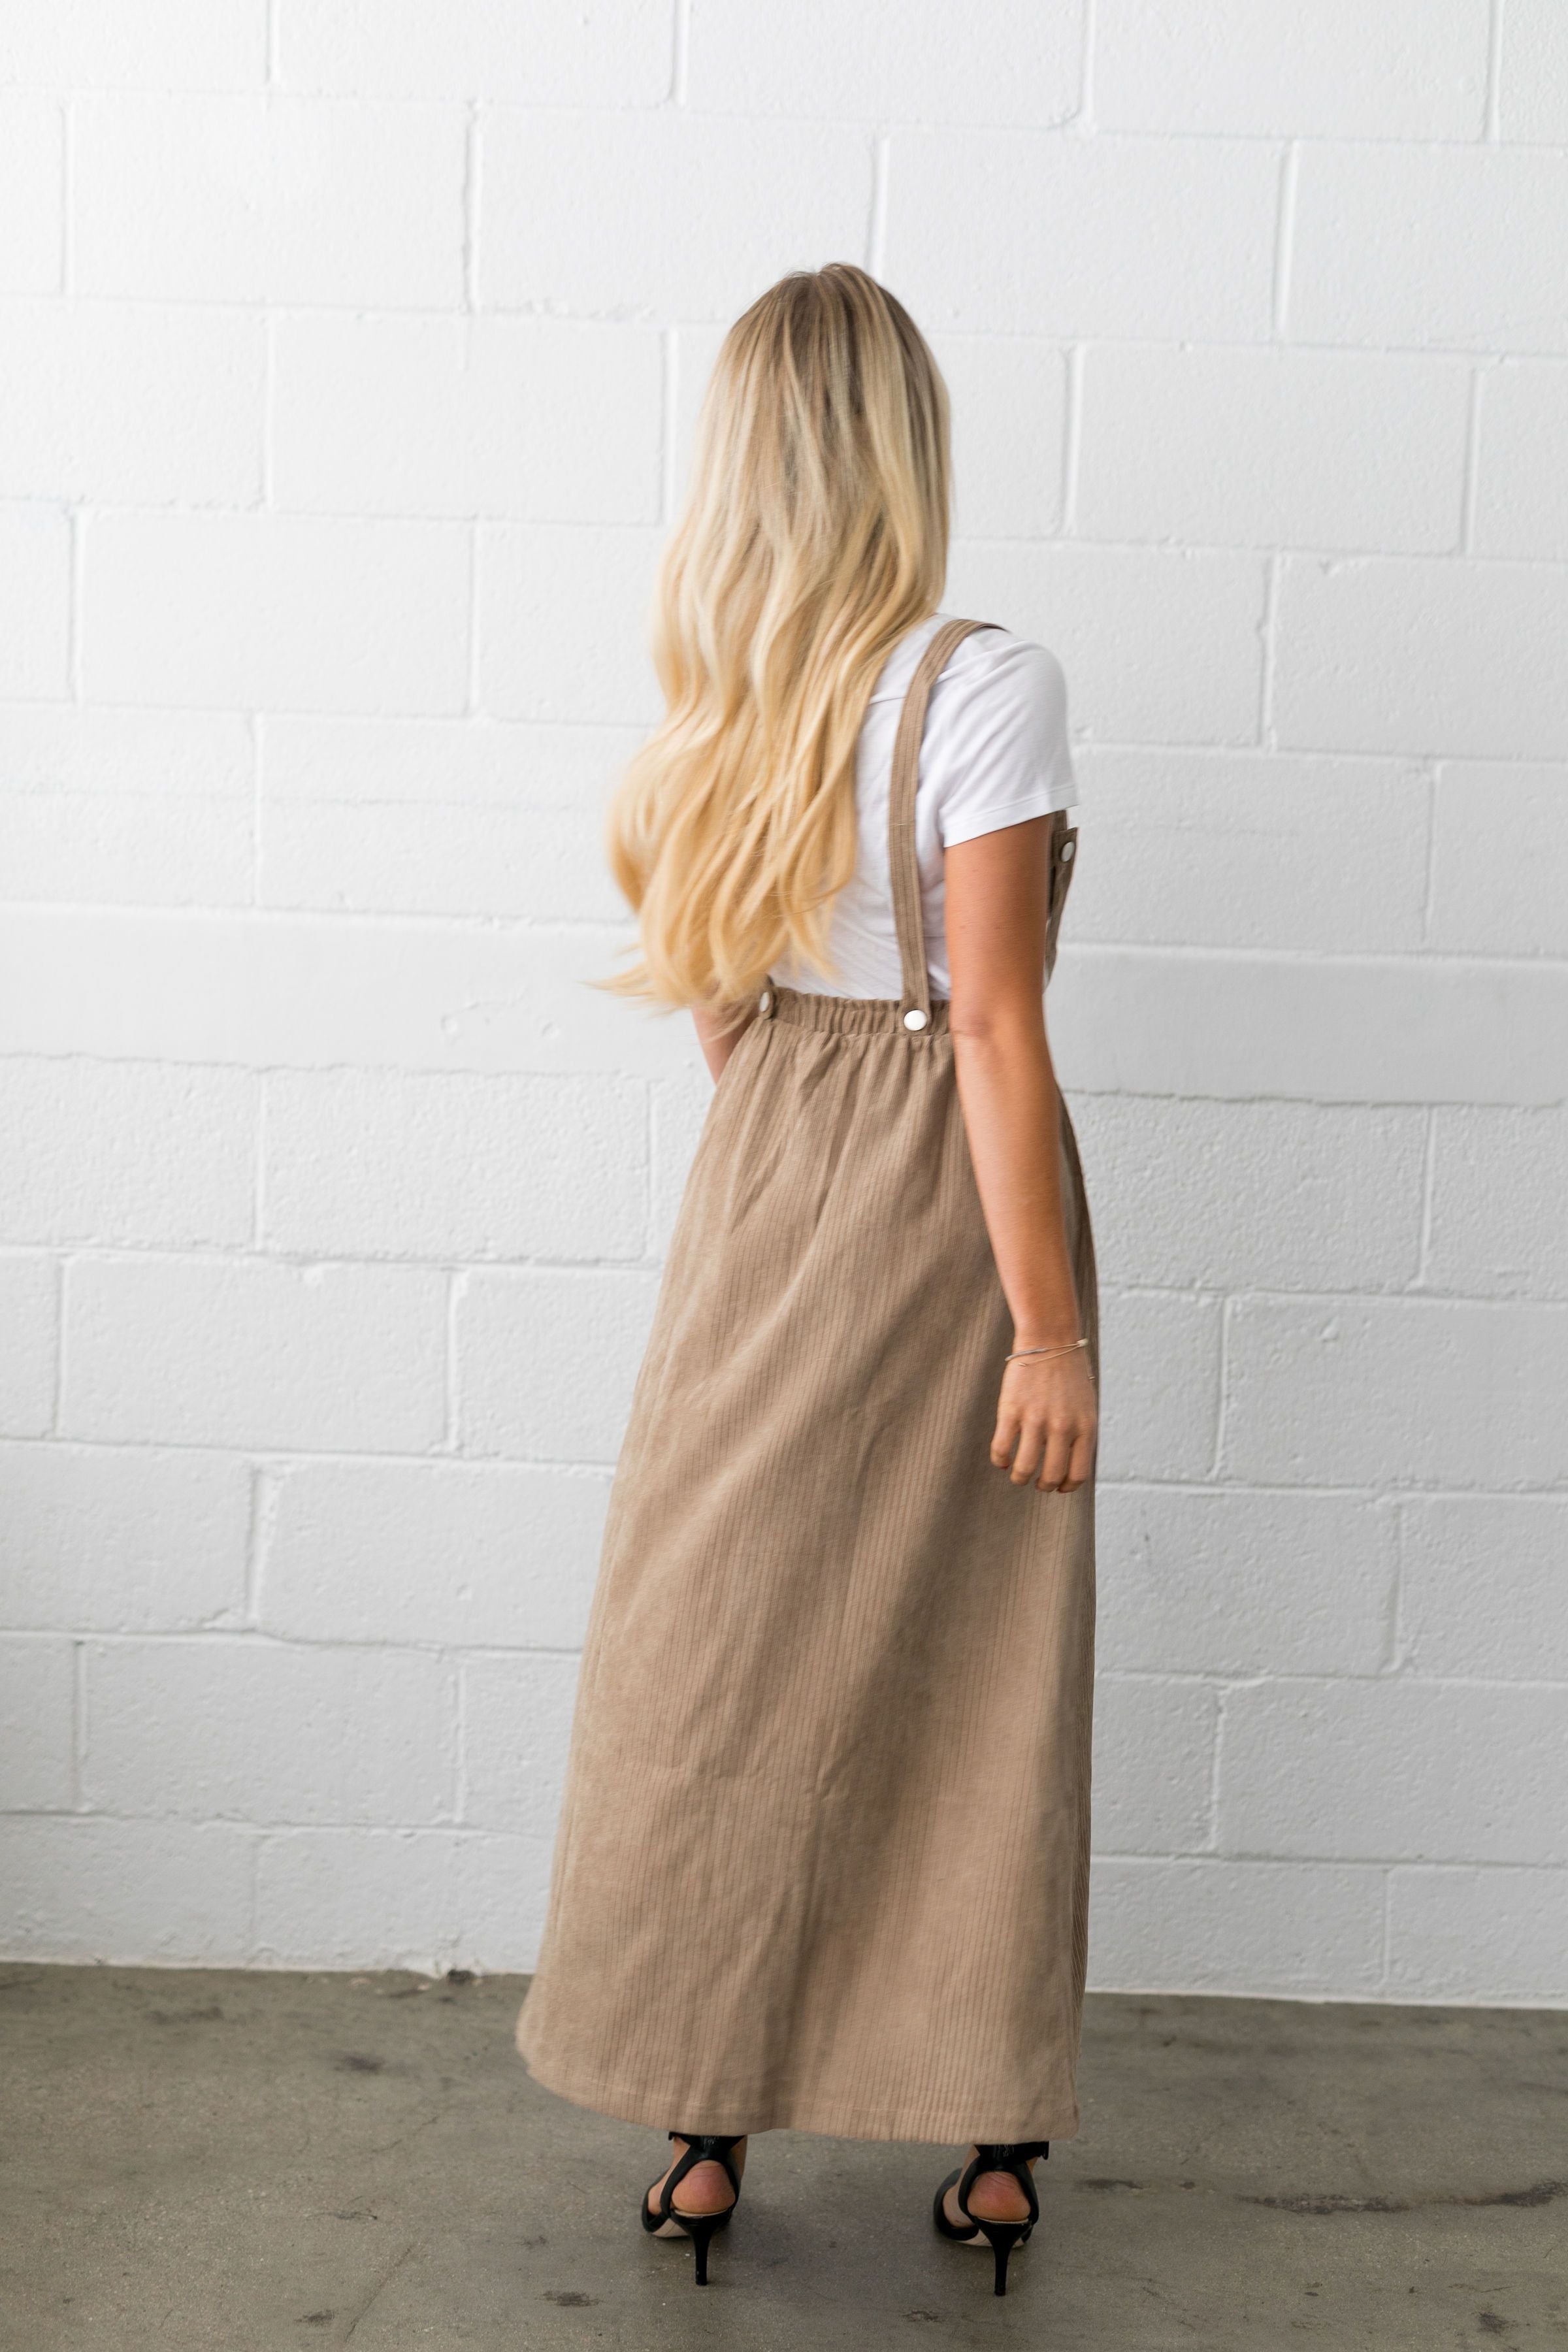 The Suspense Is Killing Me Skirt - ALL SALES FINAL